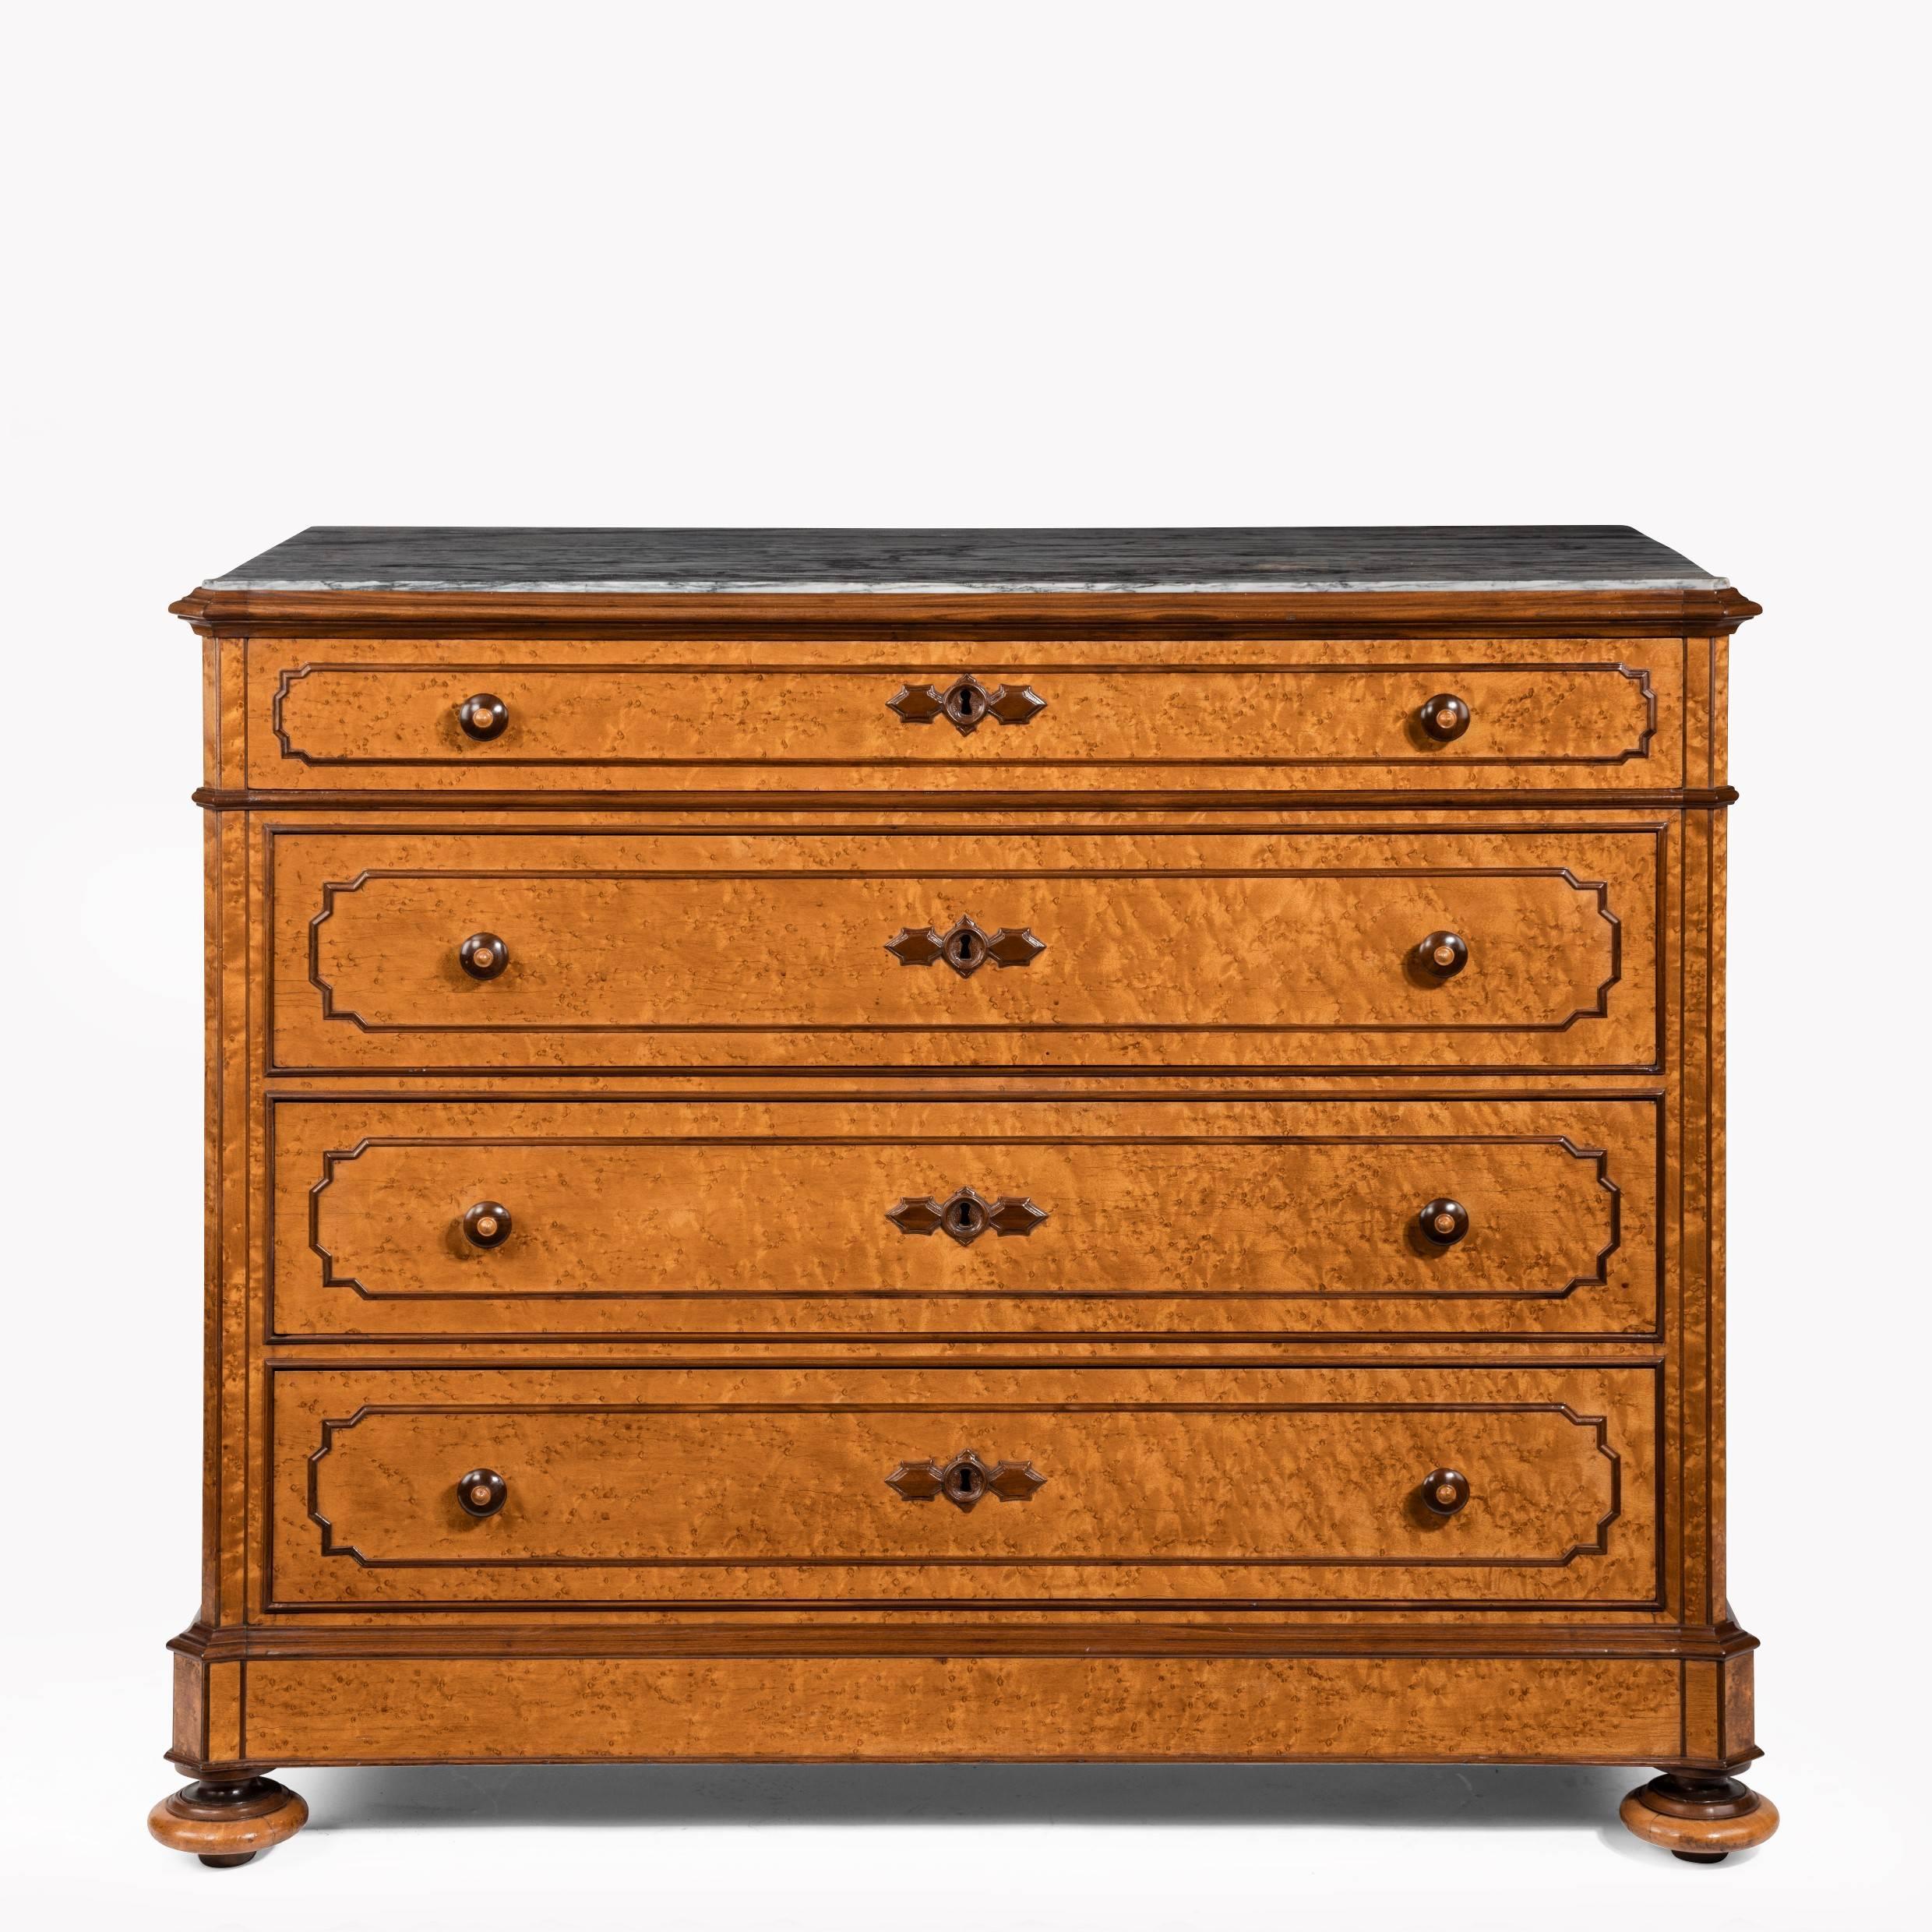 A good and unusual pair of bird’s-eye maple commodes by Zignago & Picasso, each of rectangular form with cut corners and four drawers, with the original grey marbles set into the top, decorated with solid kingwood mouldings, handles and key plat W,